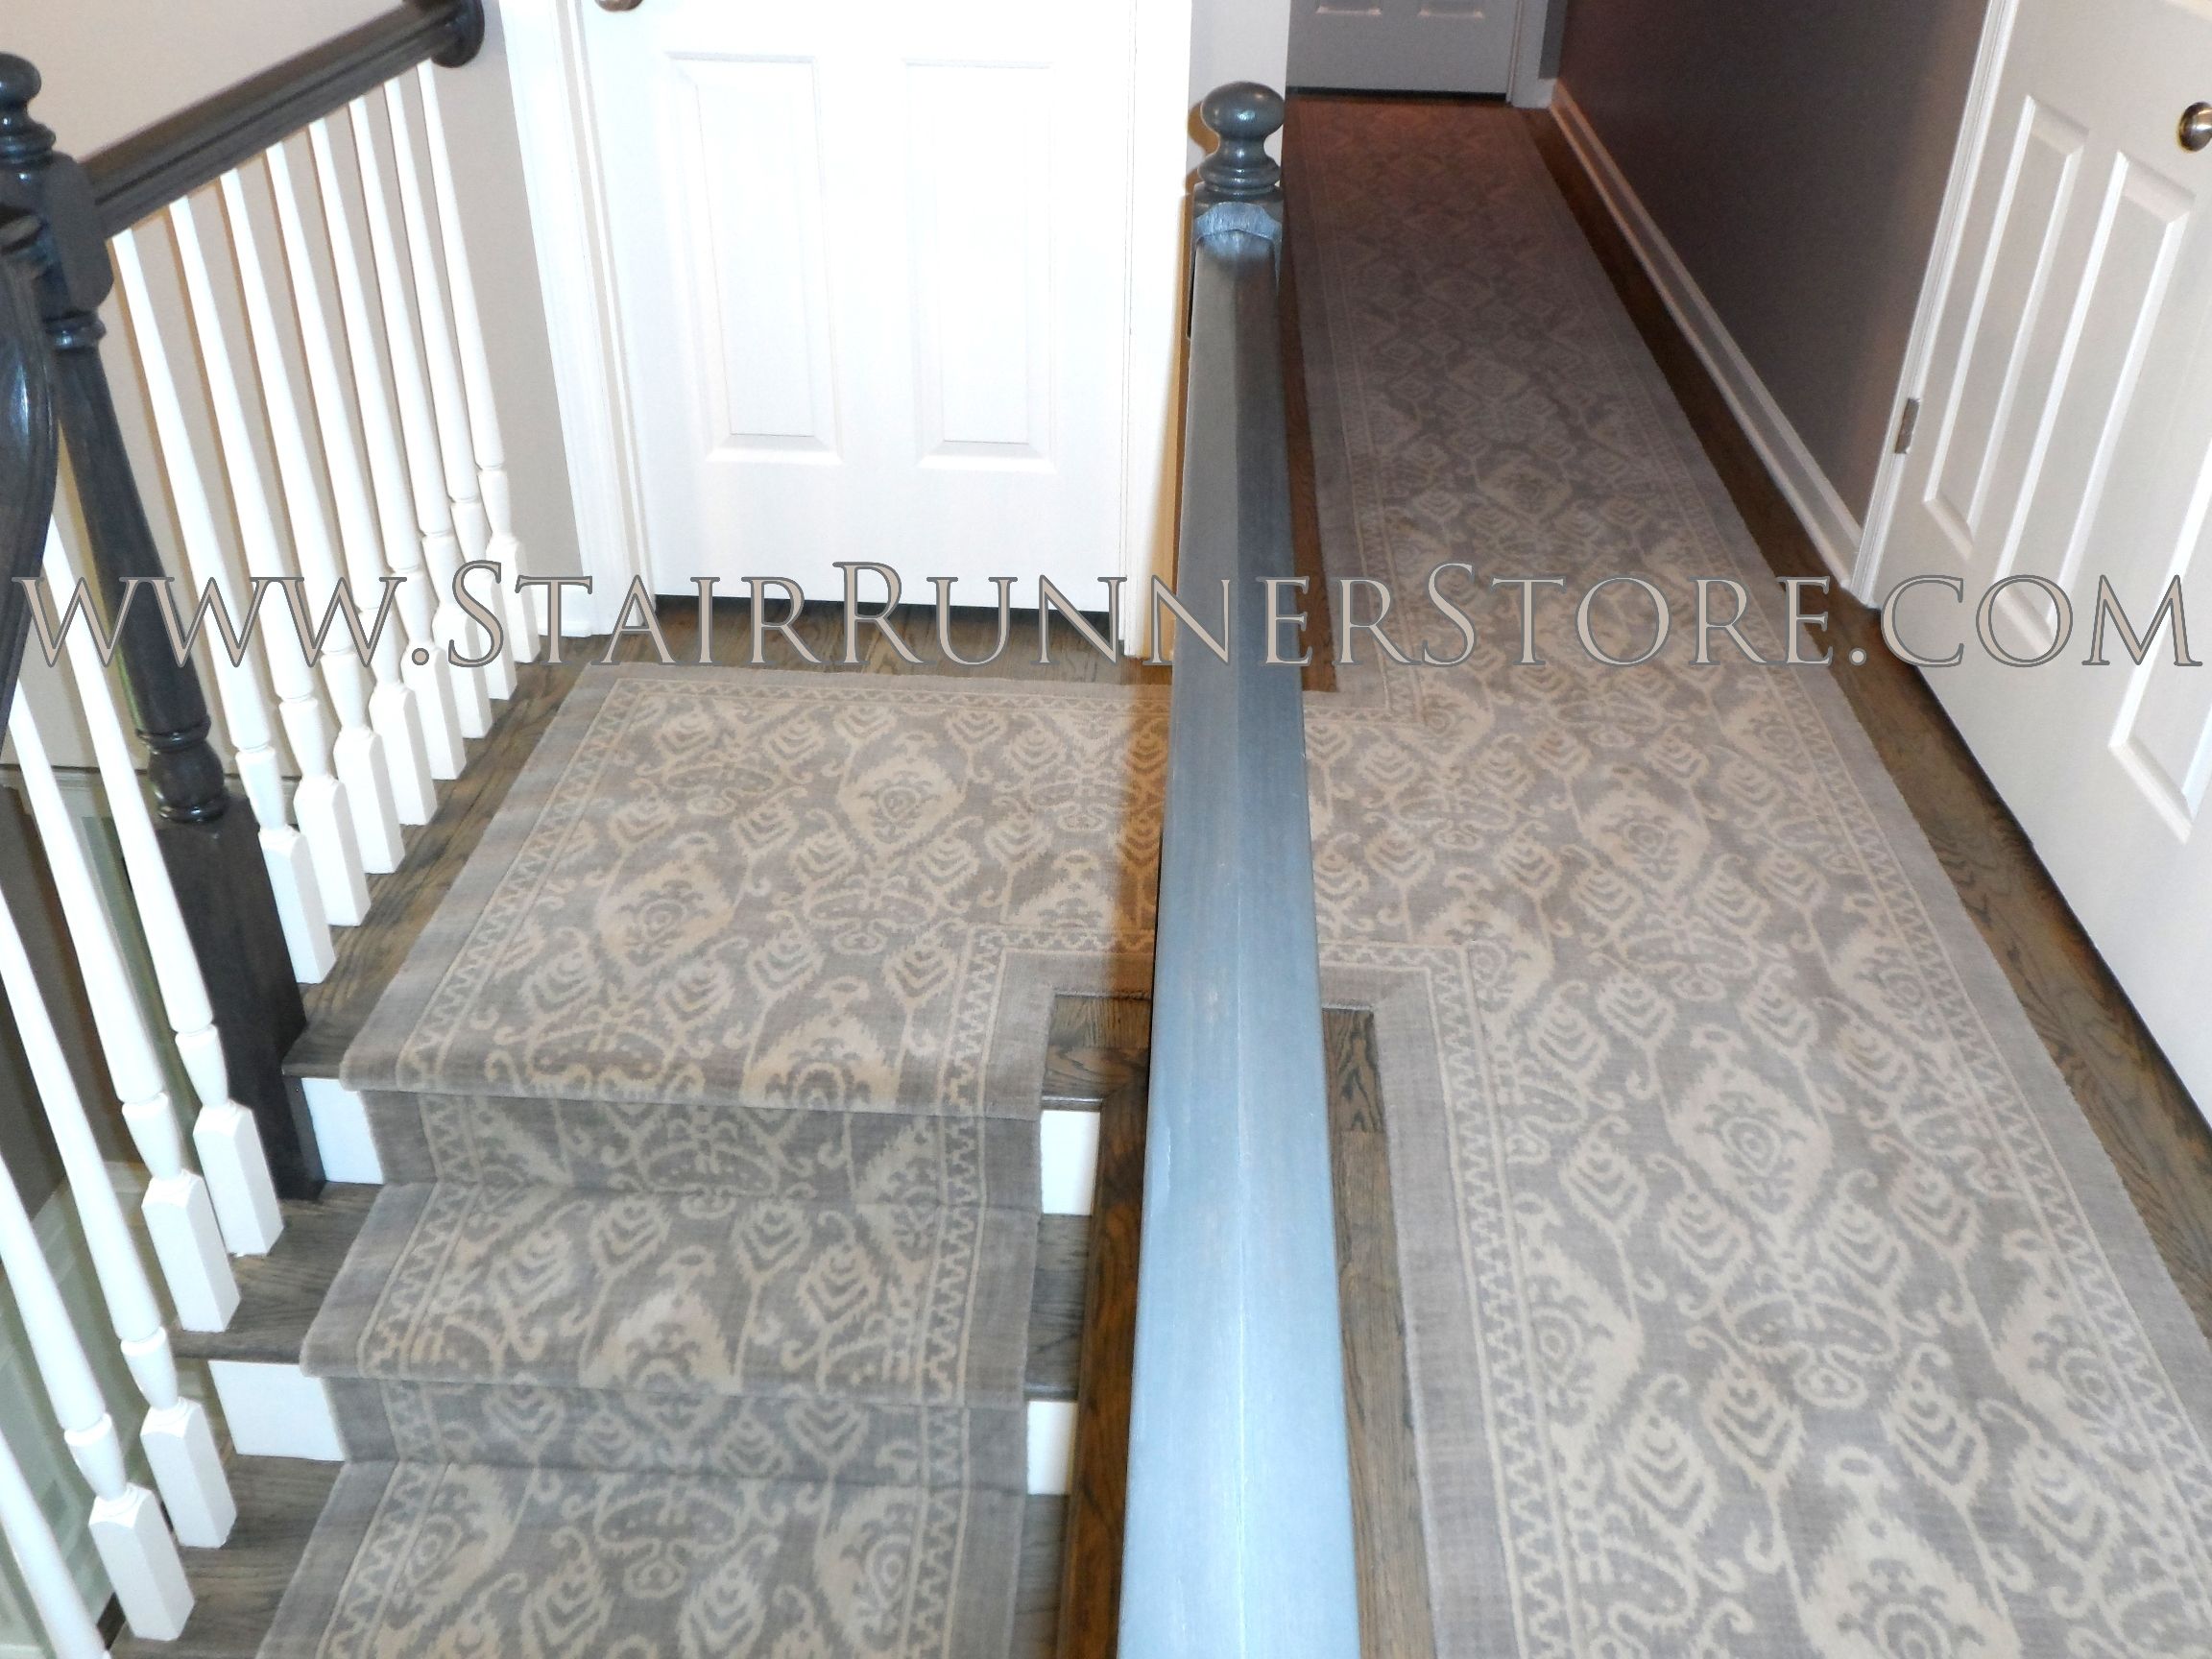 Custom Hallway Runner Installations Stair Runner Store Blog Within Runners For The Hallway (View 12 of 20)